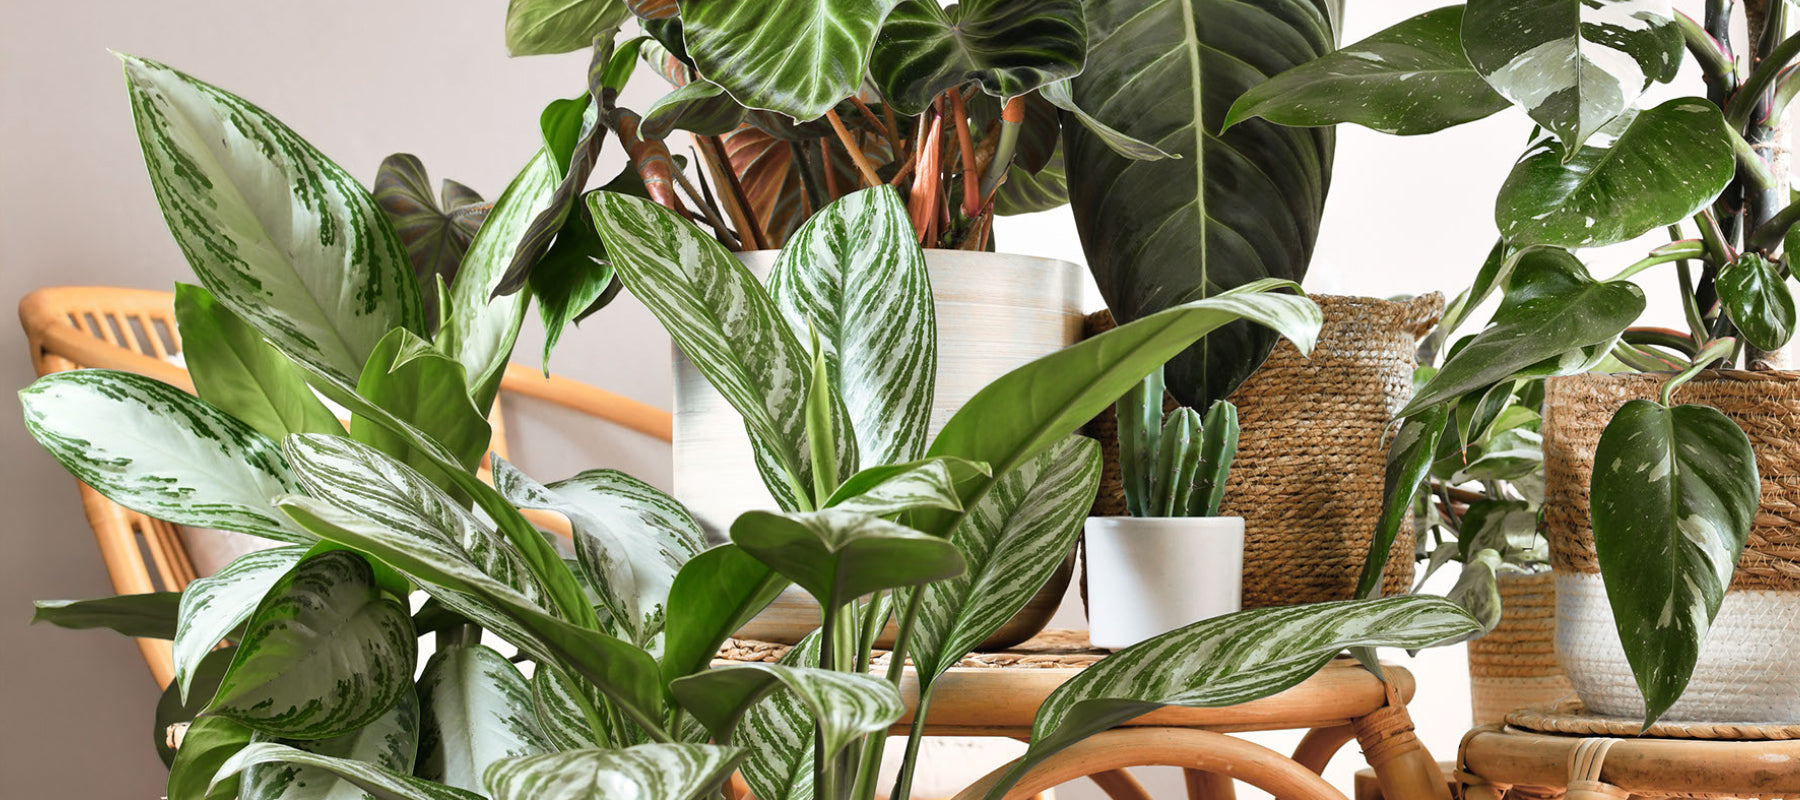 How To Choose The Right Houseplants For Your Living Space - Hortology